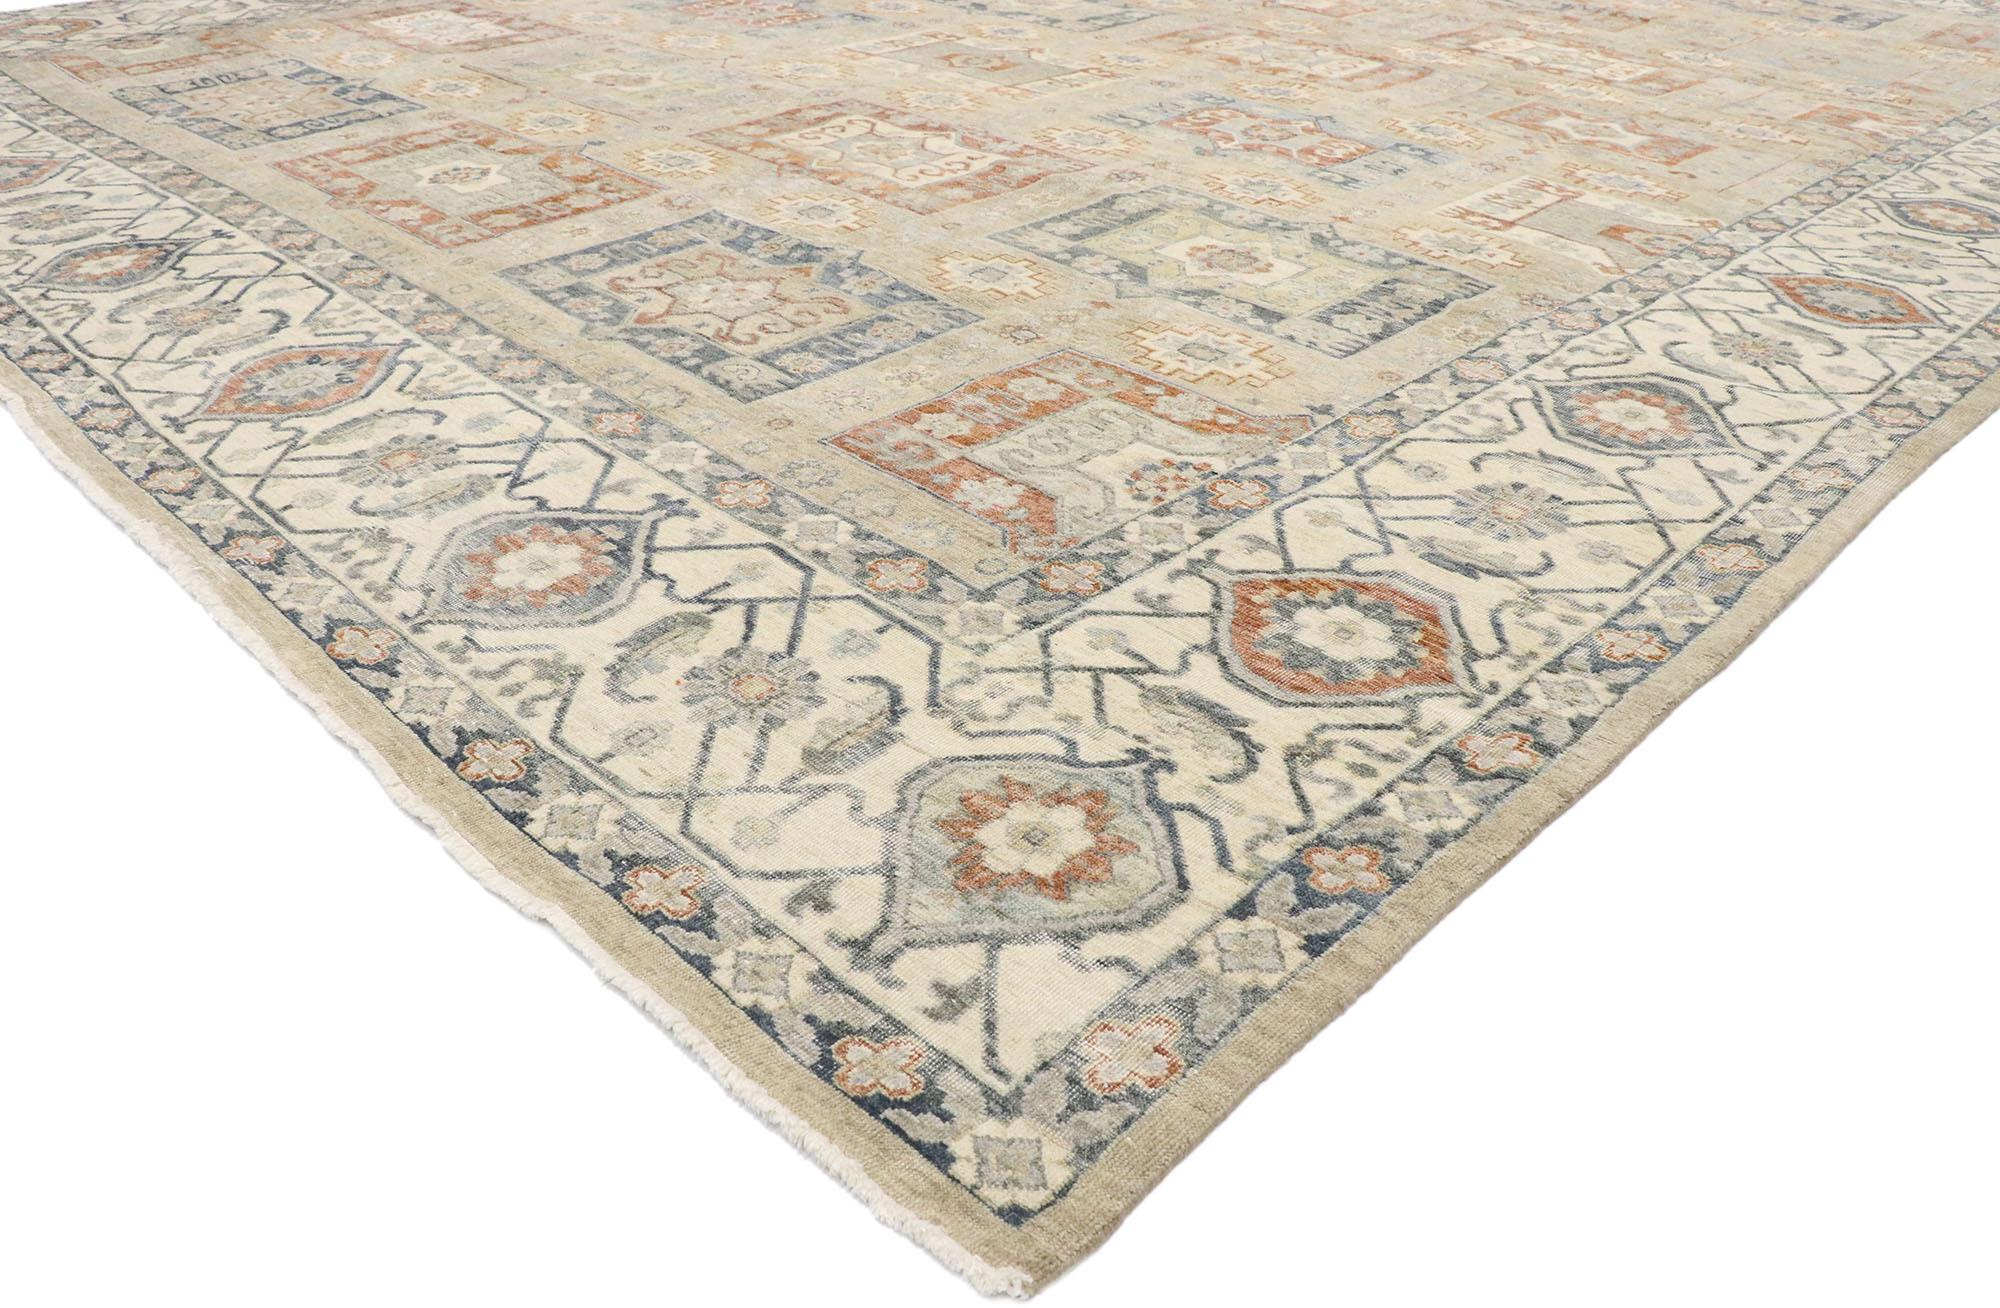 30631 New Contemporary Oushak style rug with Arts & Crafts style. This hand-knotted wool new contemporary Oushak-style rug features an all-over geometric pattern overlaid upon an abrashed neutral field. The attractive design is comprised of offset